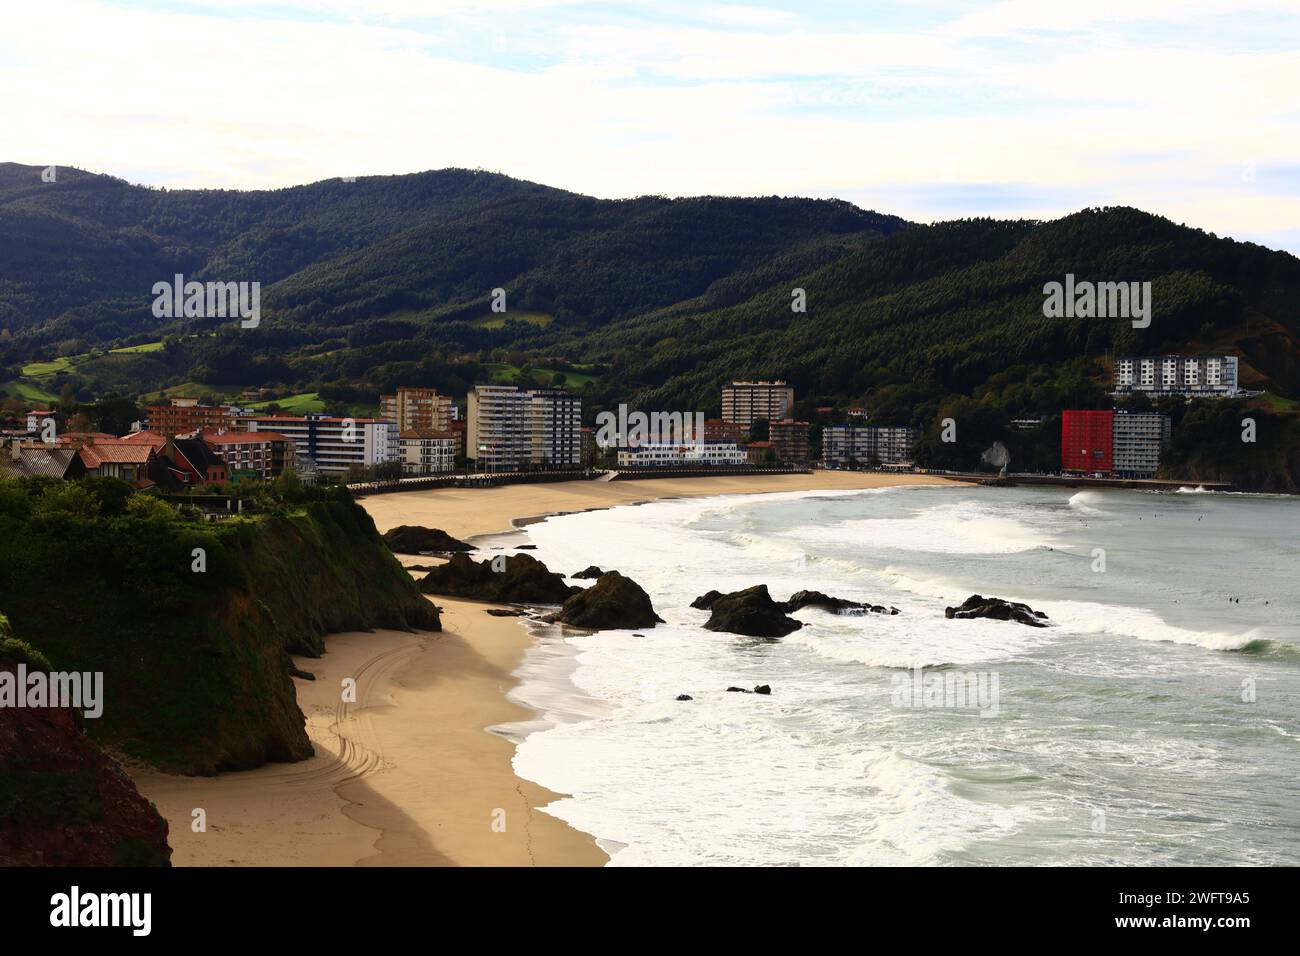 View on the Bakio beach located in the autonomous community of the Basque Country in Spain Stock Photo